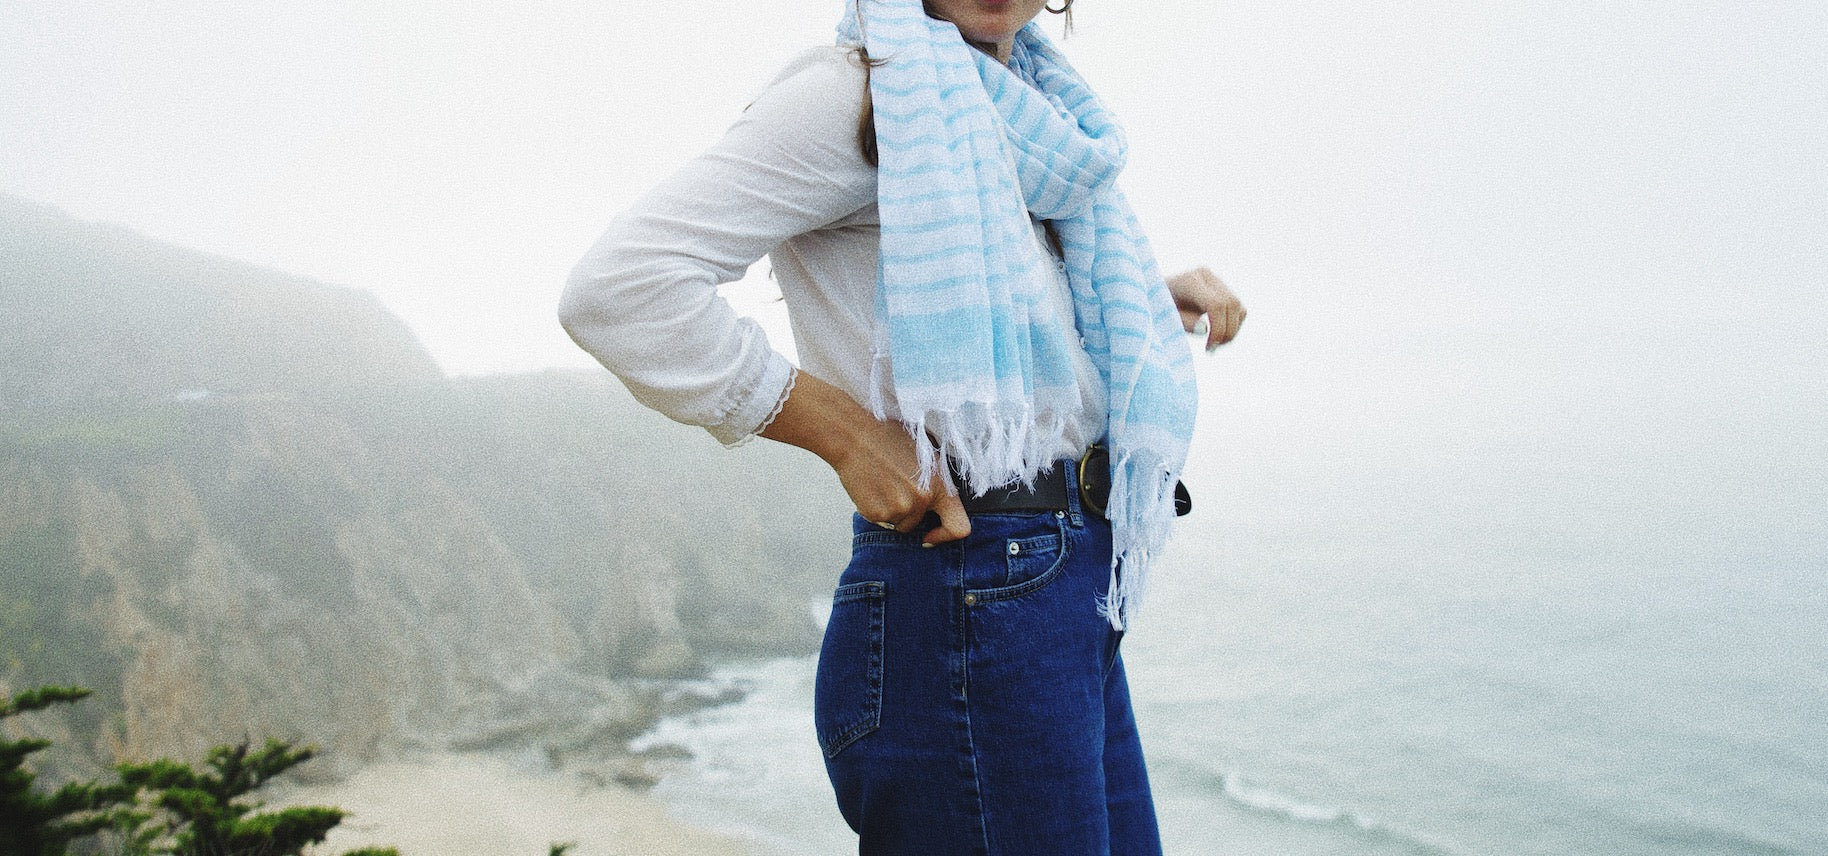 Limited Edition White and Blue Striped Handwoven Scarf